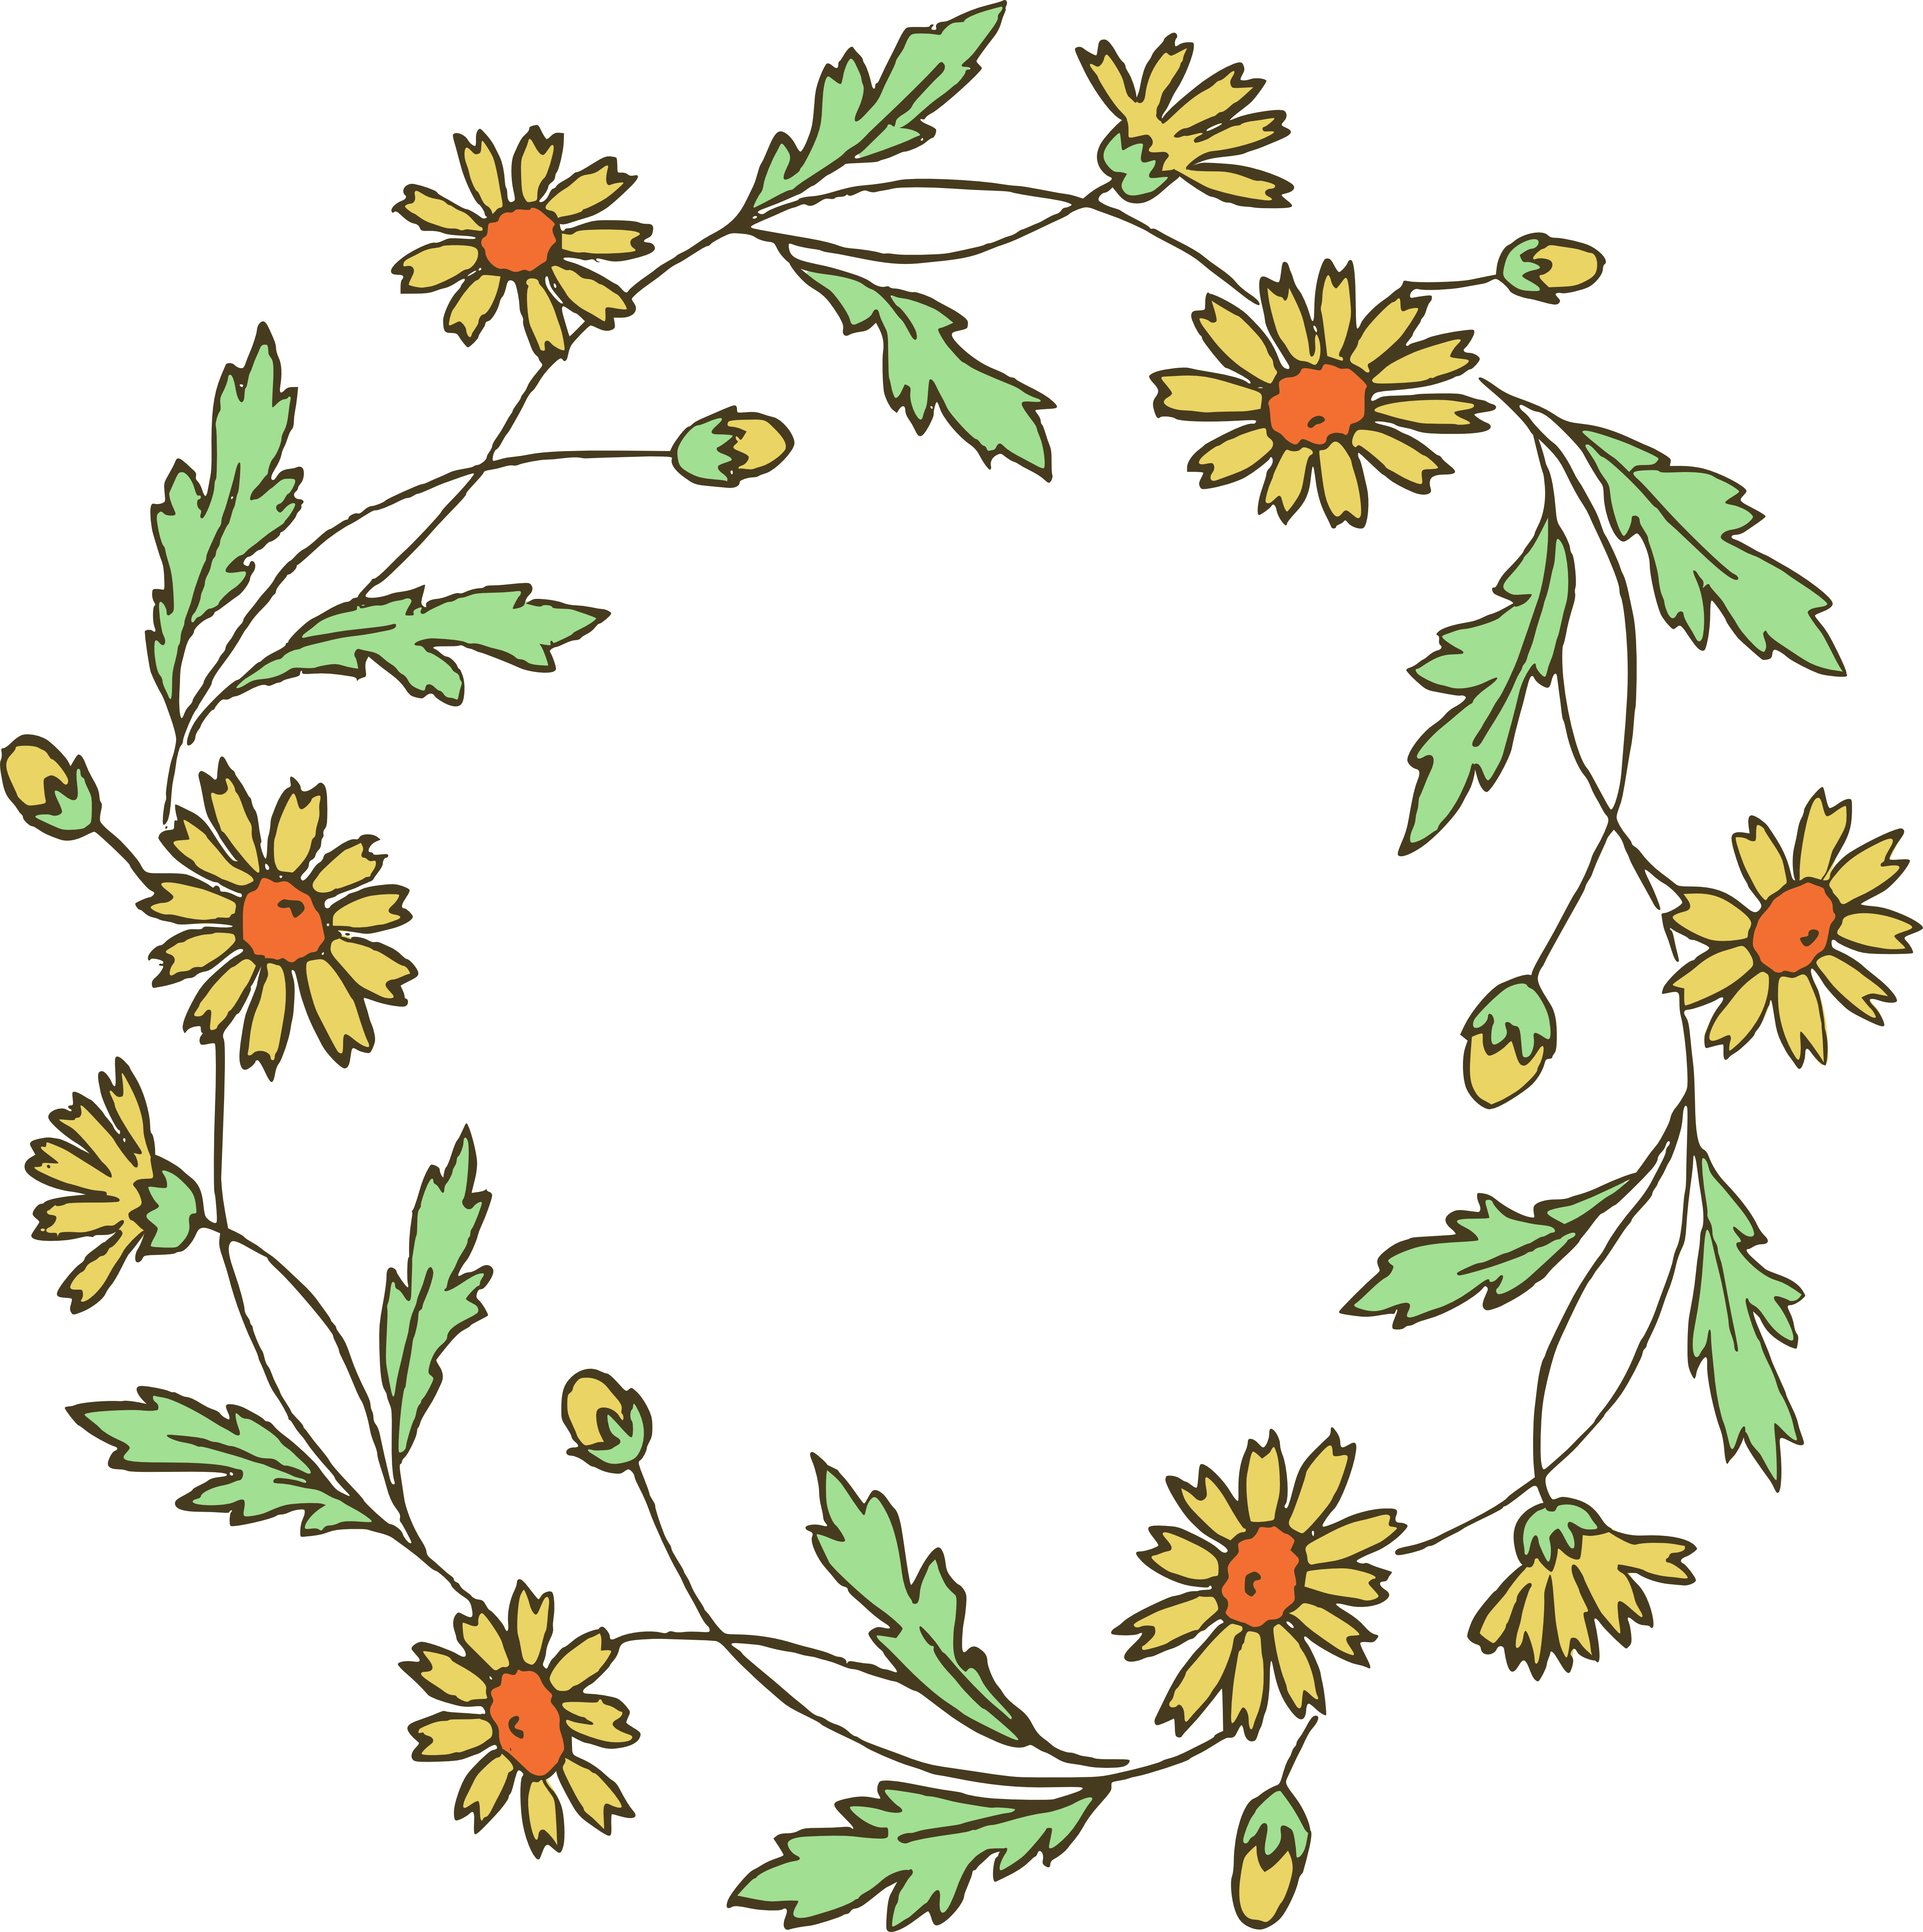 Free Stock Vector & Clip Art - Vintage Wreath with Ribbons and ...